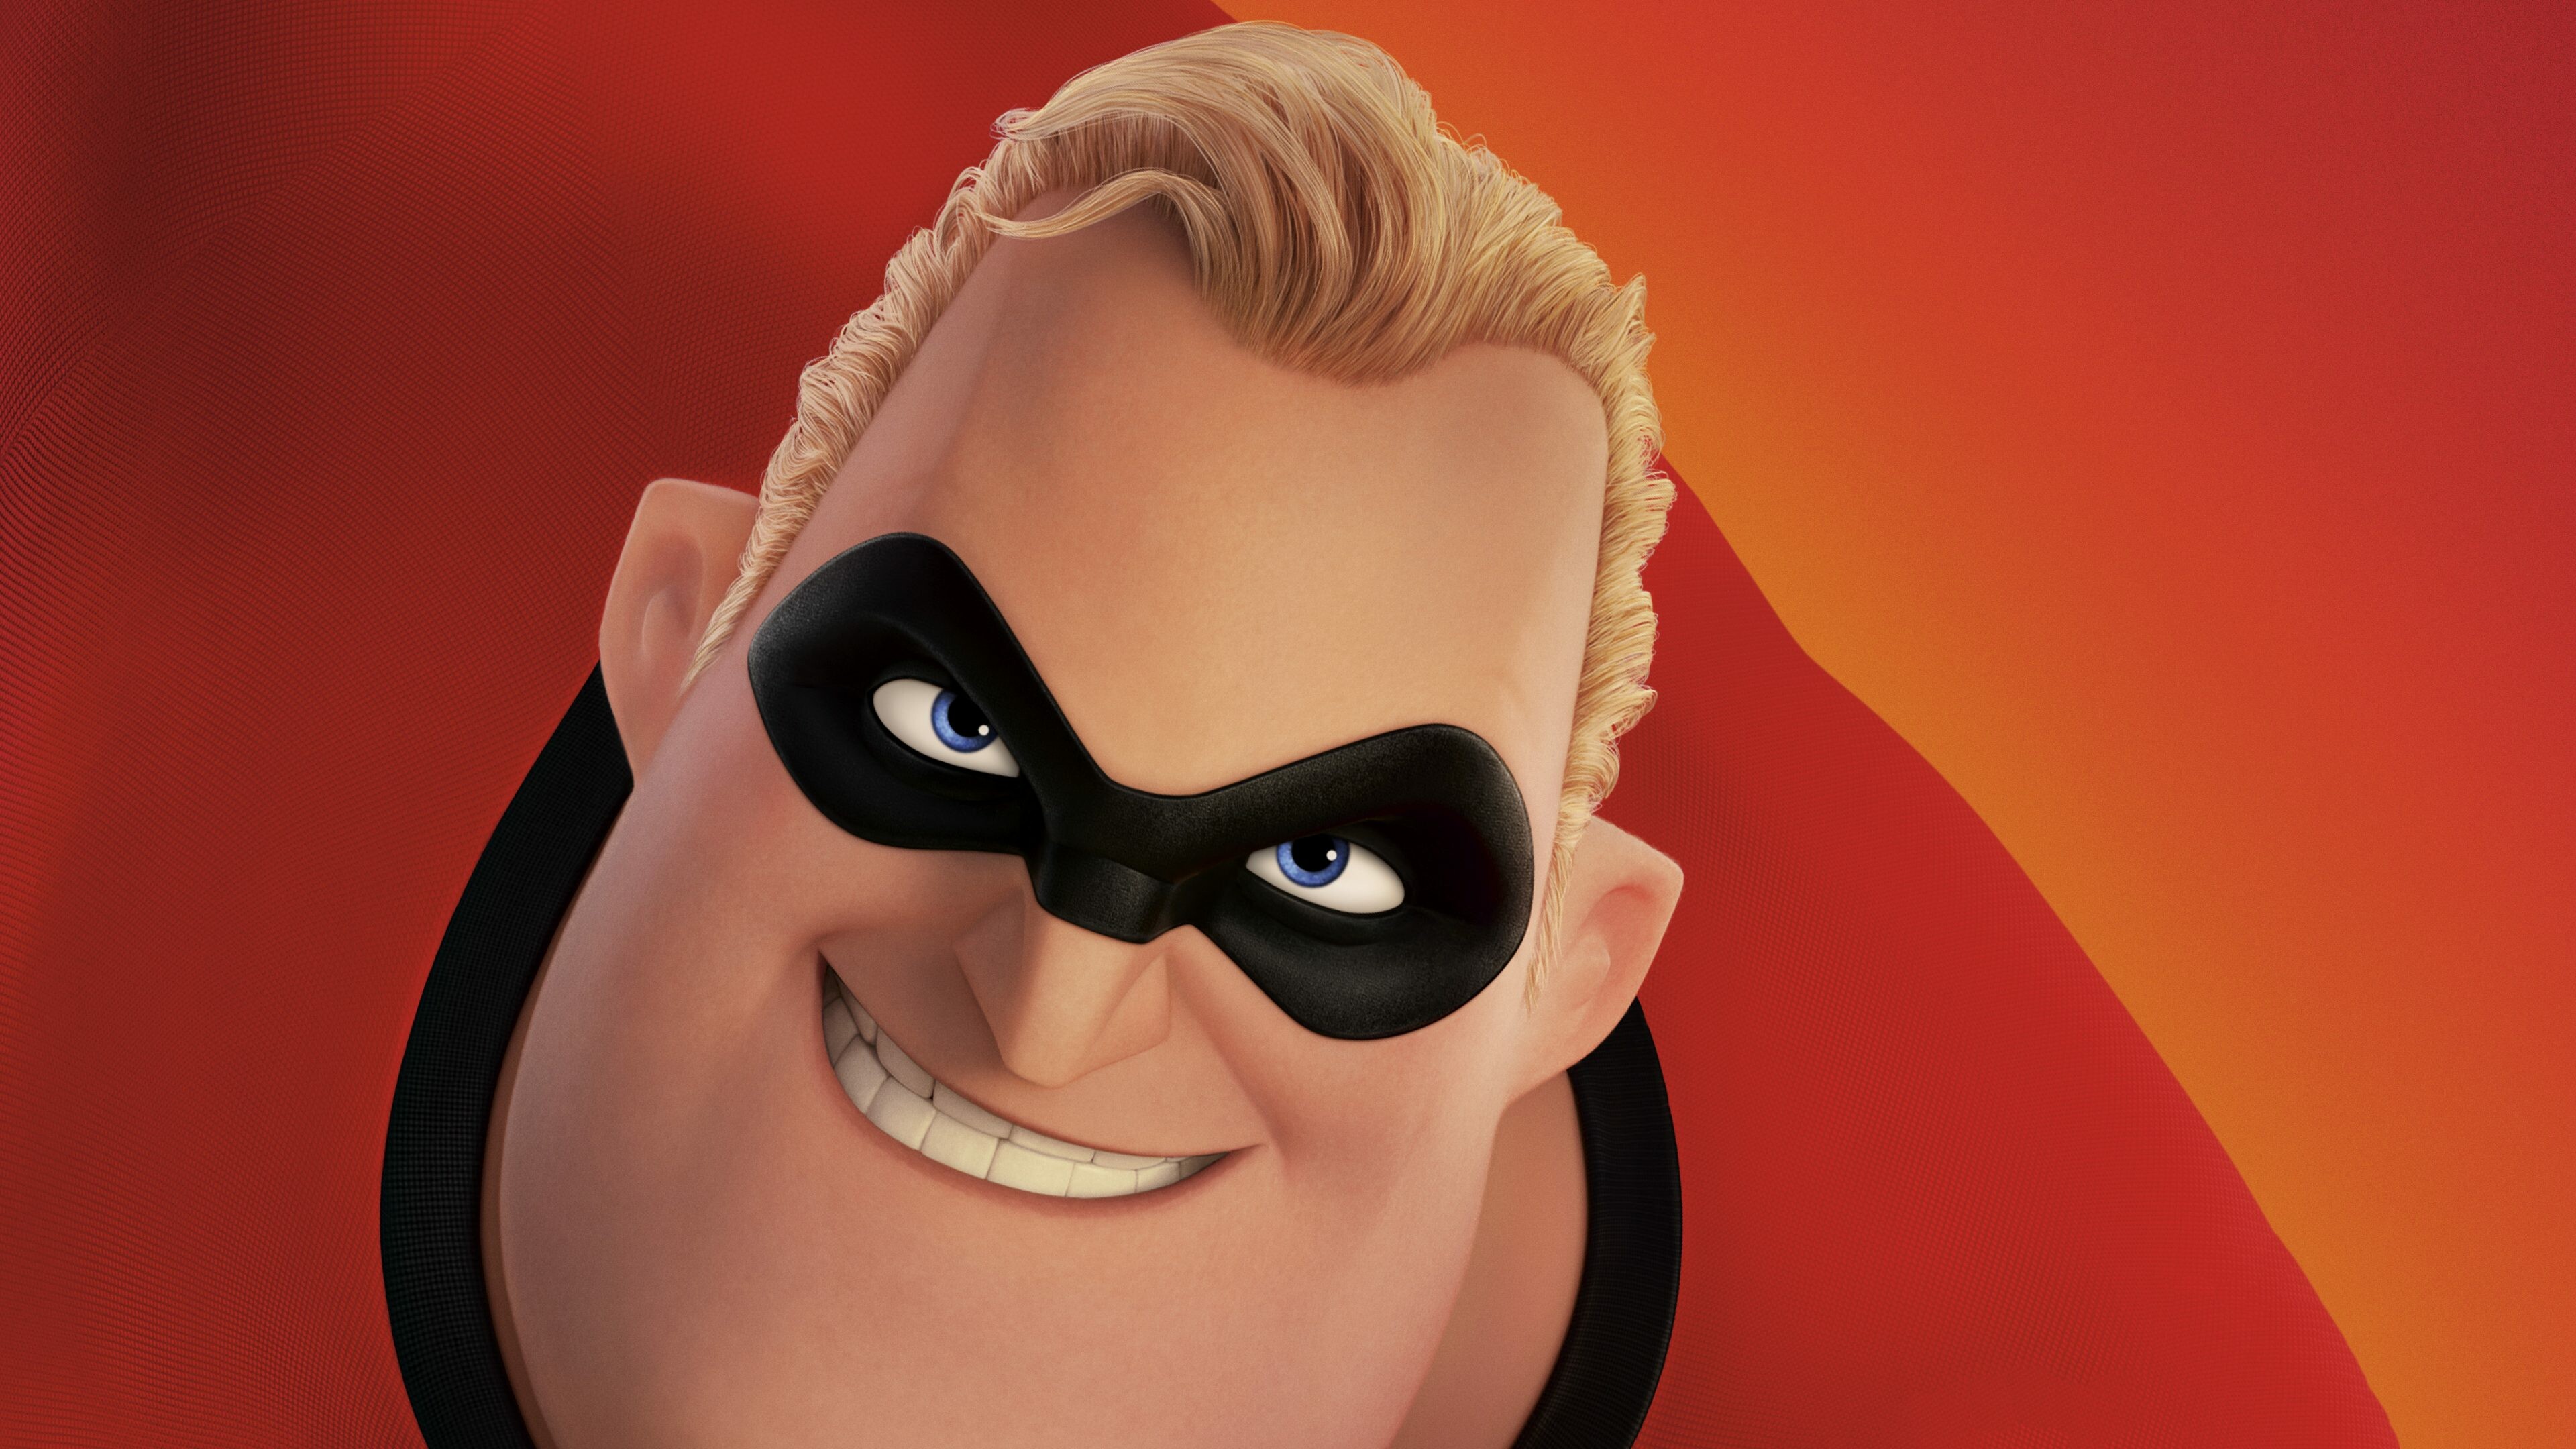 The Incredibles: Poster, Mr. Incredible, Craig T. Nelson as Bob Parr. 3840x2160 4K Background.